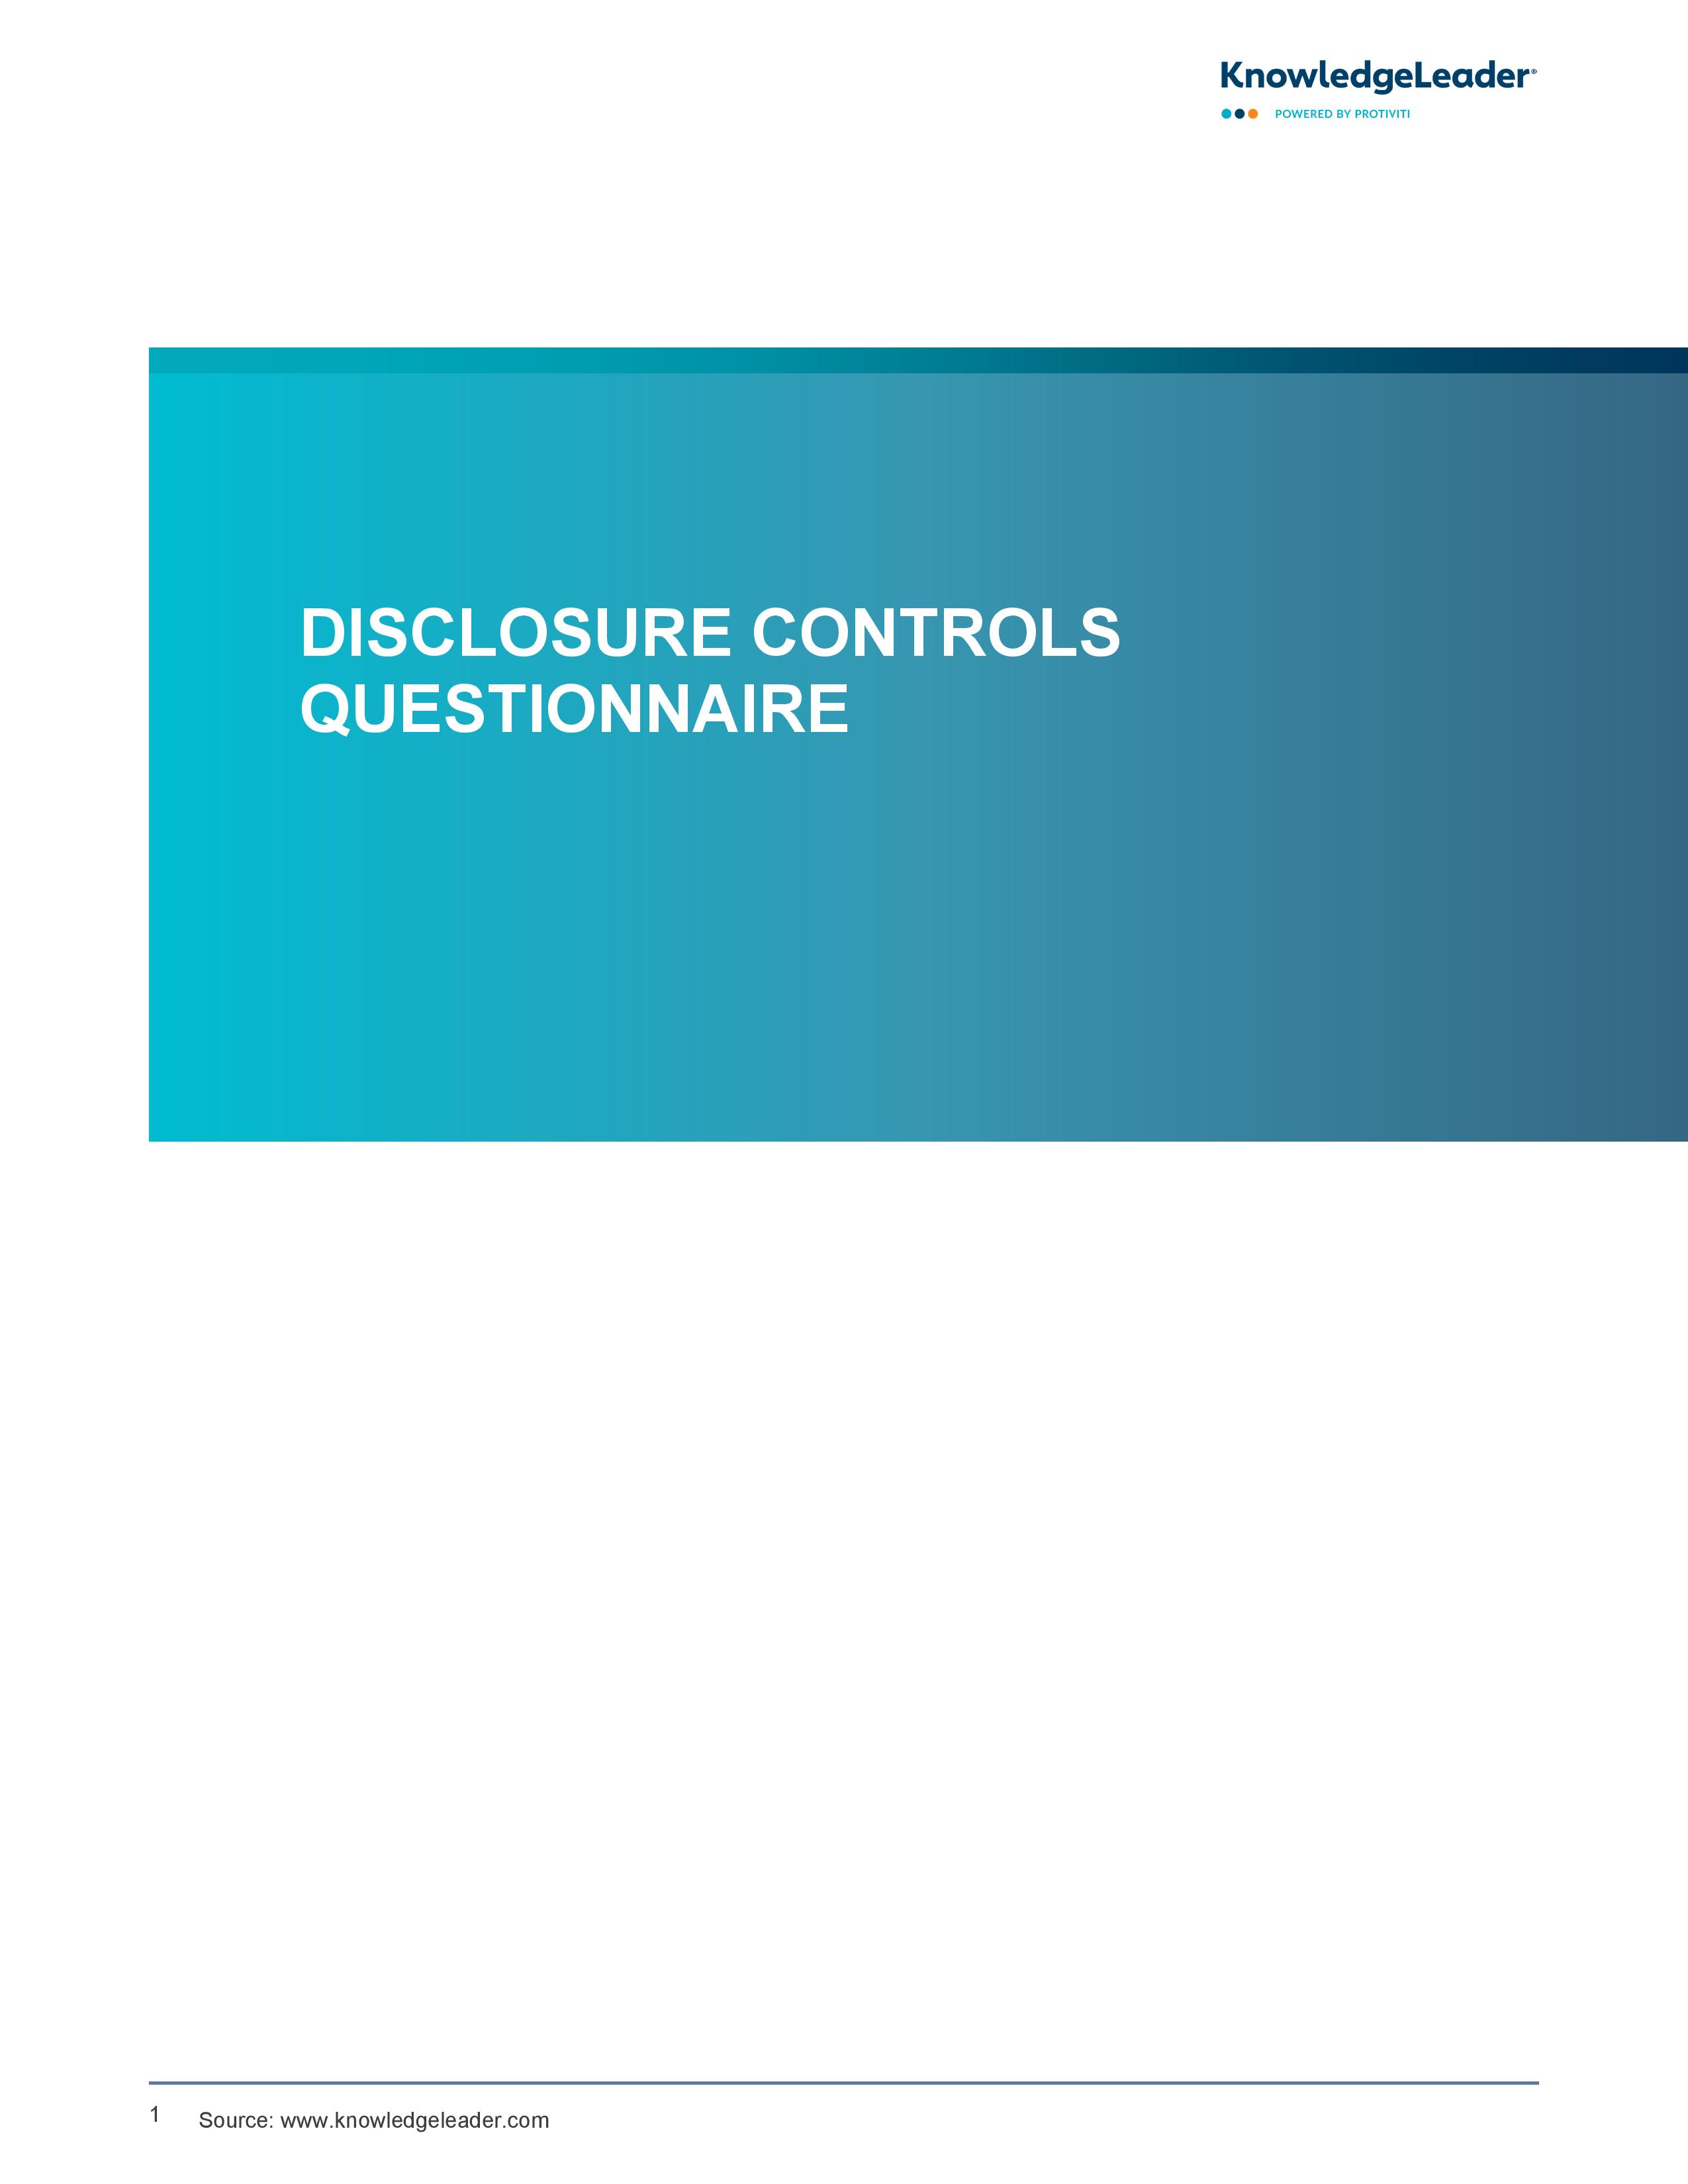 screenshot of the first page of Disclosure Controls Questionnaire